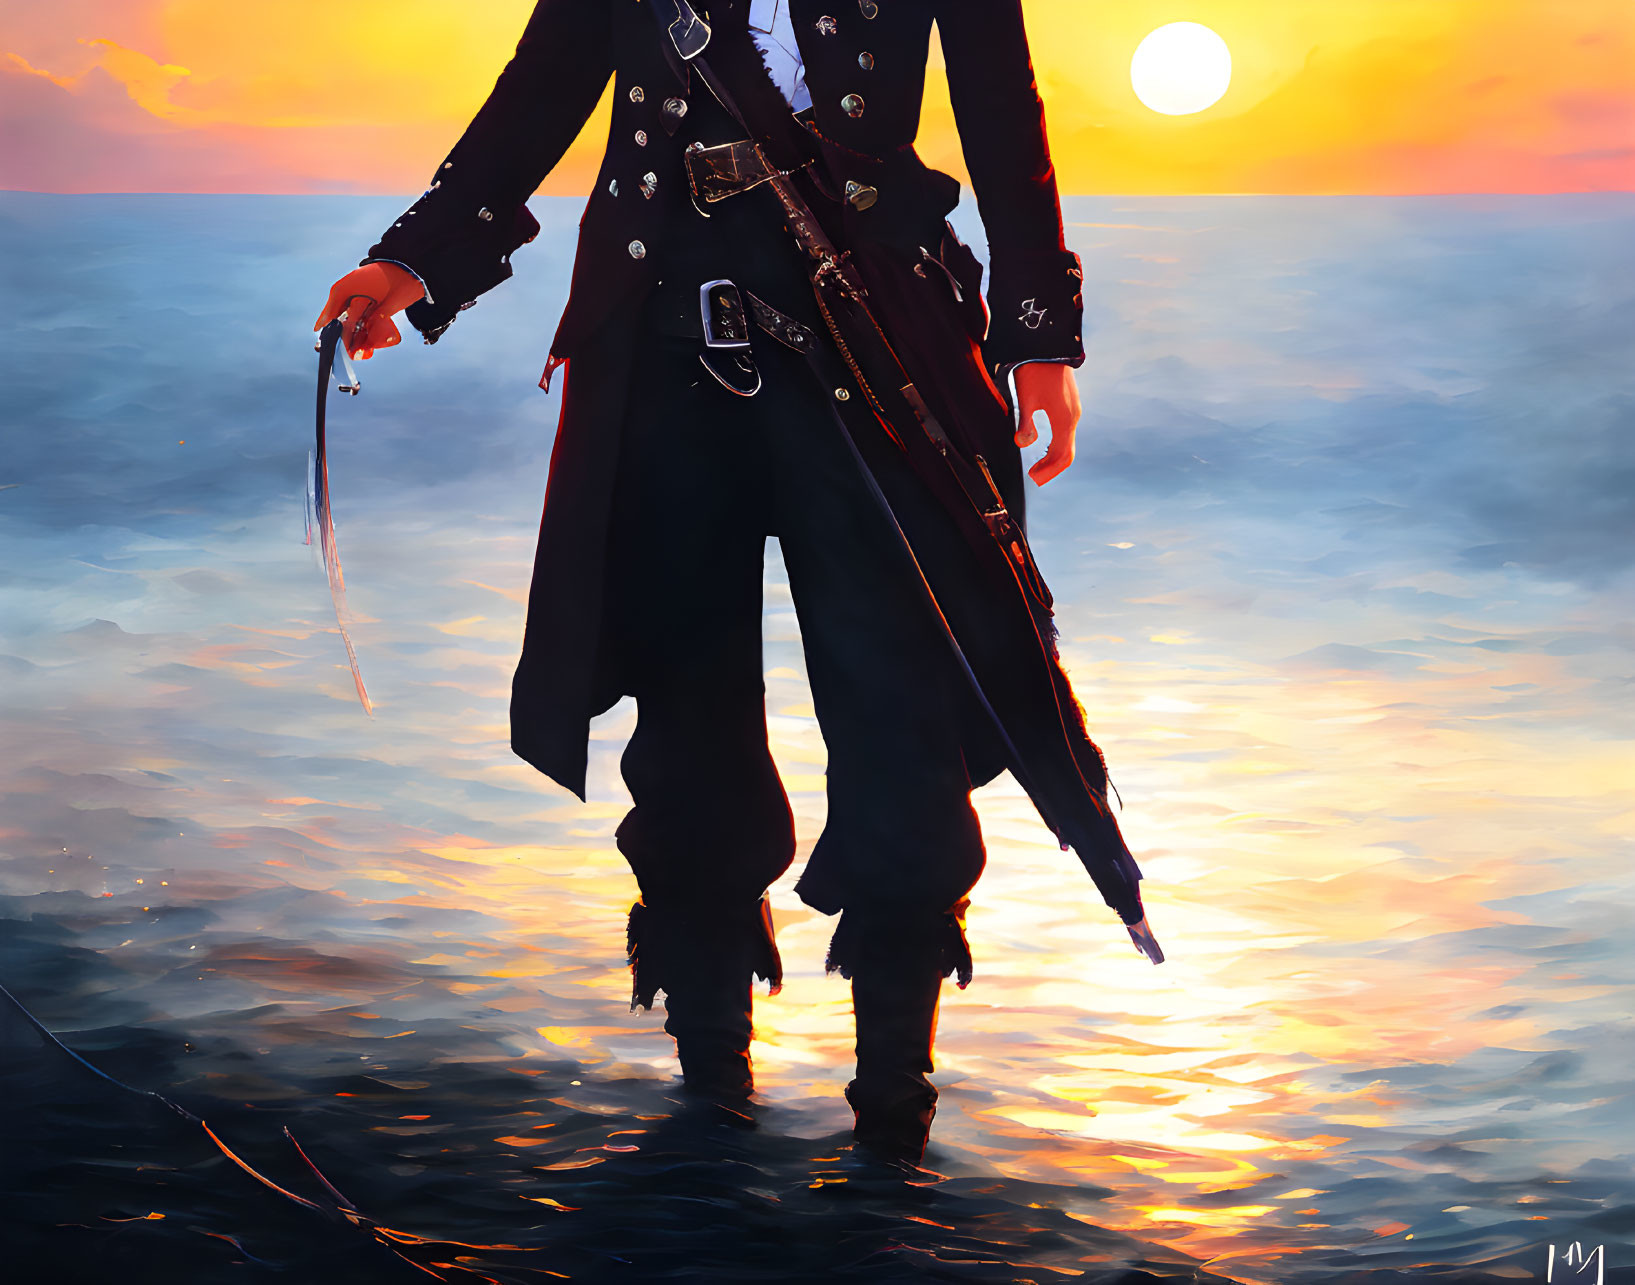 Pirate costume person with sword on water at sunset